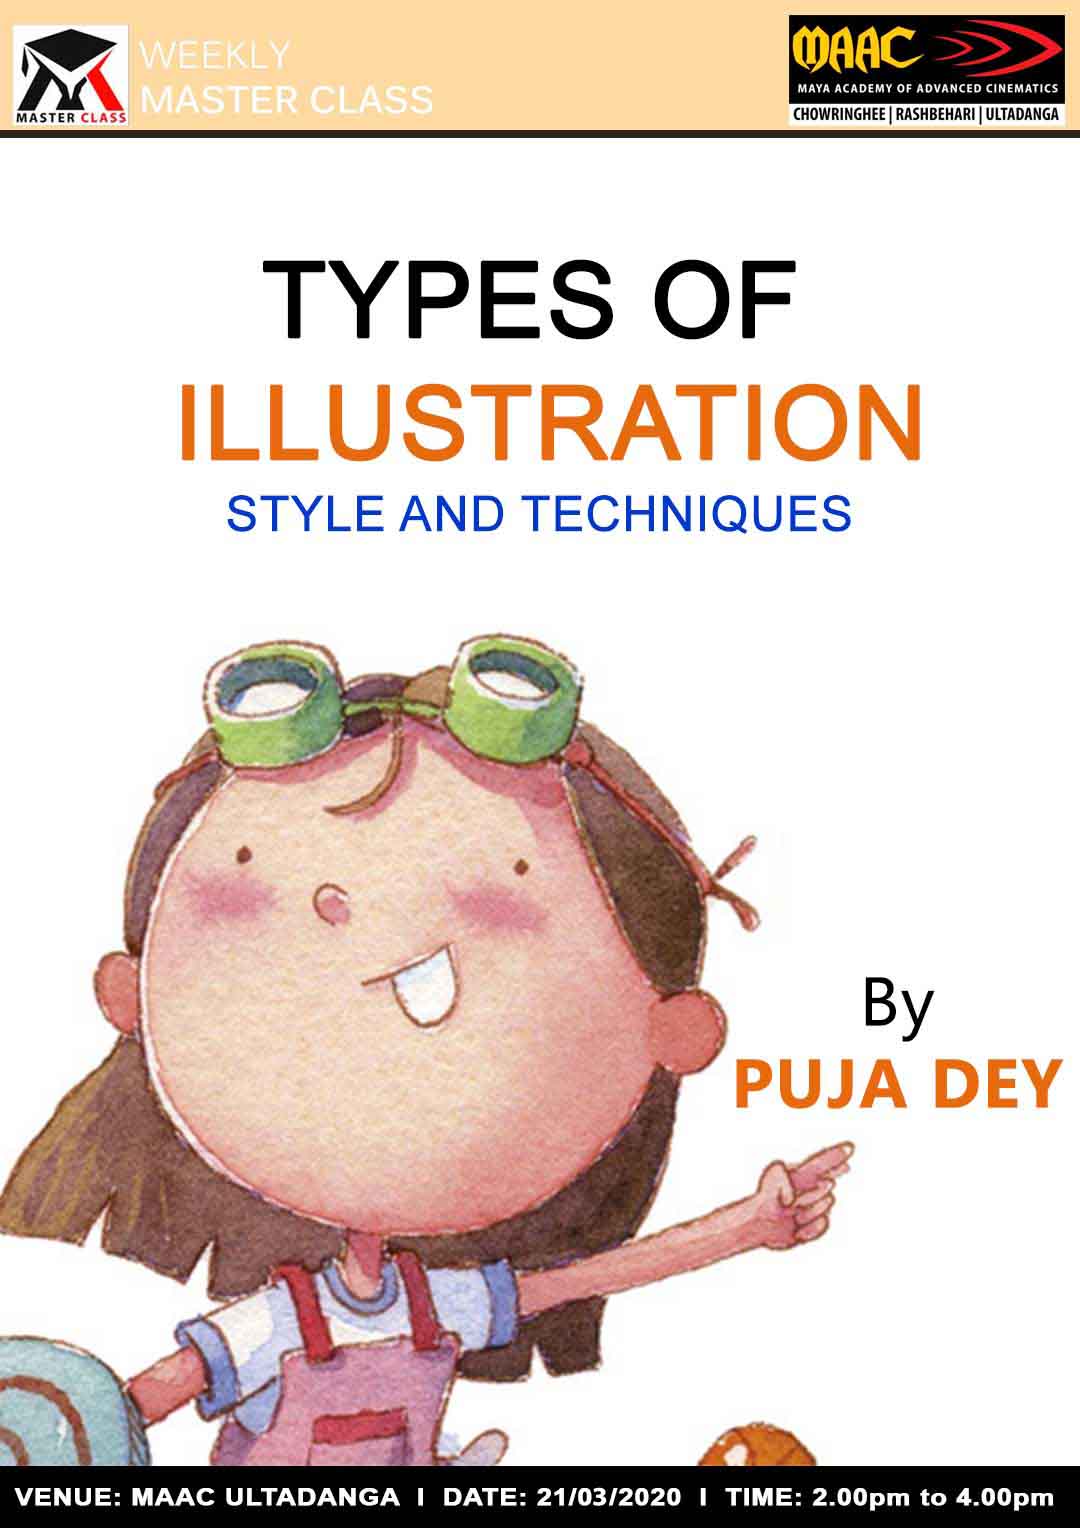 Weekly Master Class on Types Of Illustration